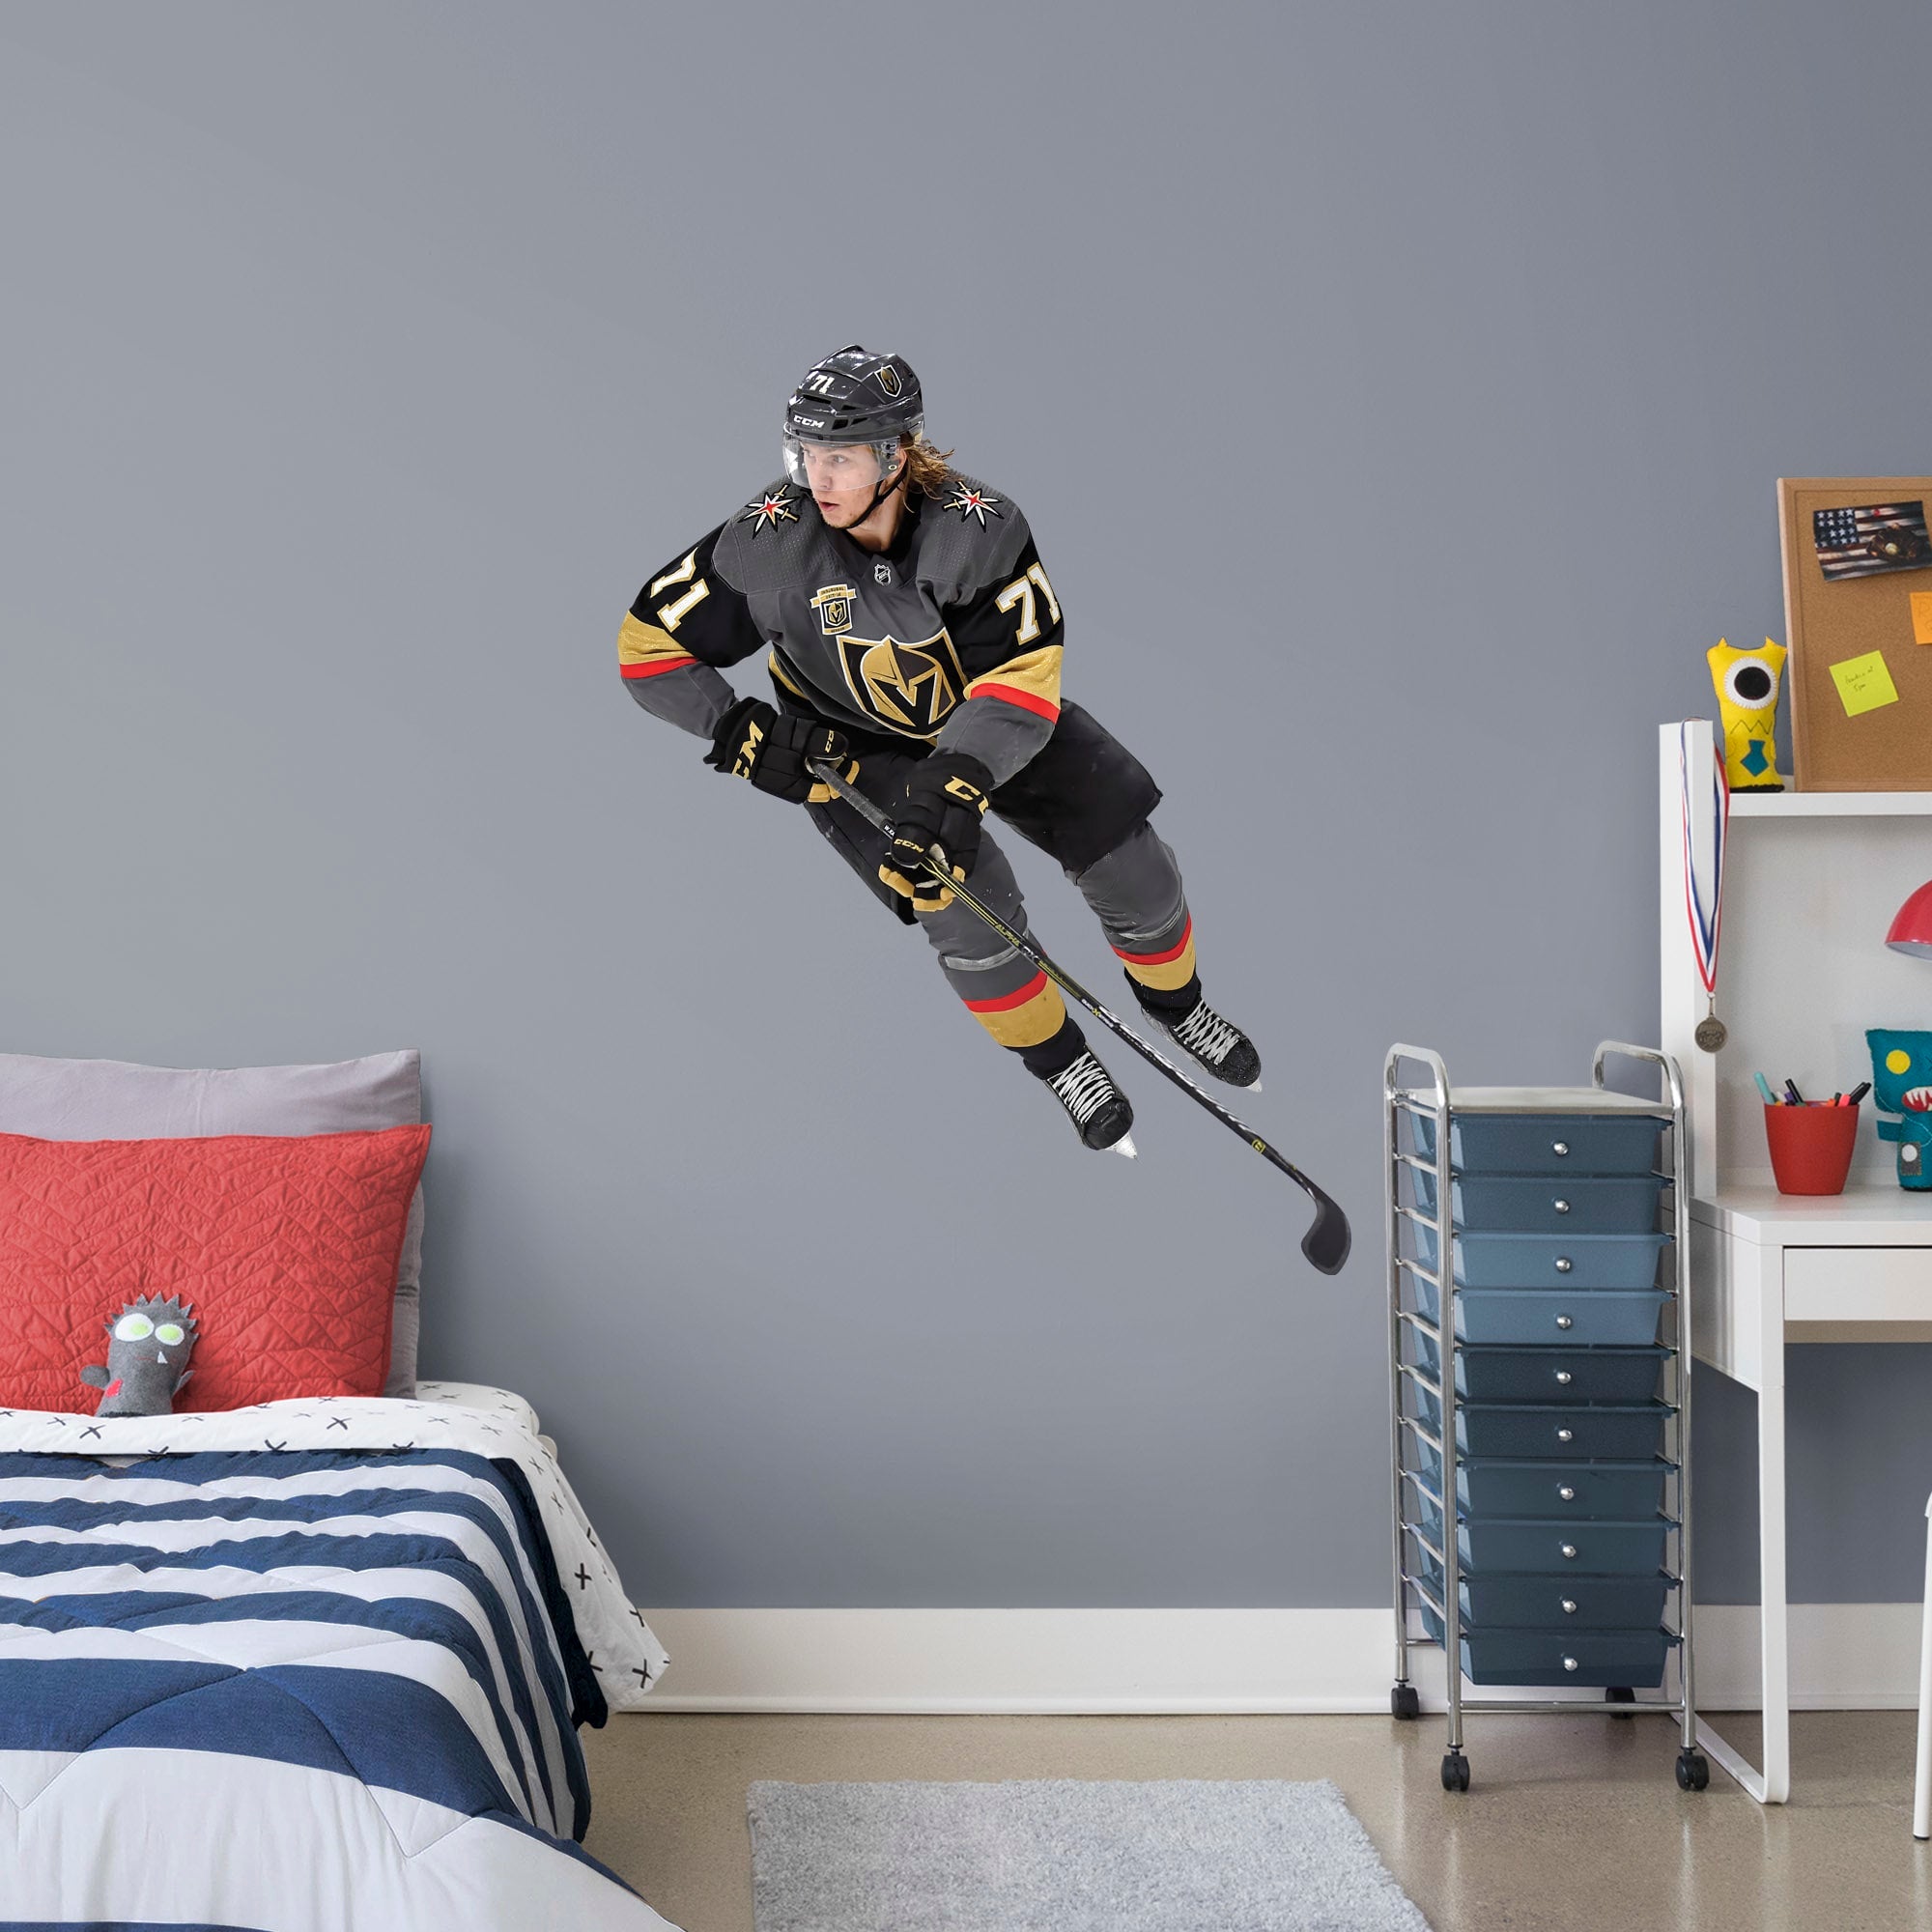 William Karlsson for Vegas Golden Knights - Officially Licensed NHL Removable Wall Decal Giant Athlete + 2 Decals (38"W x 48"H)